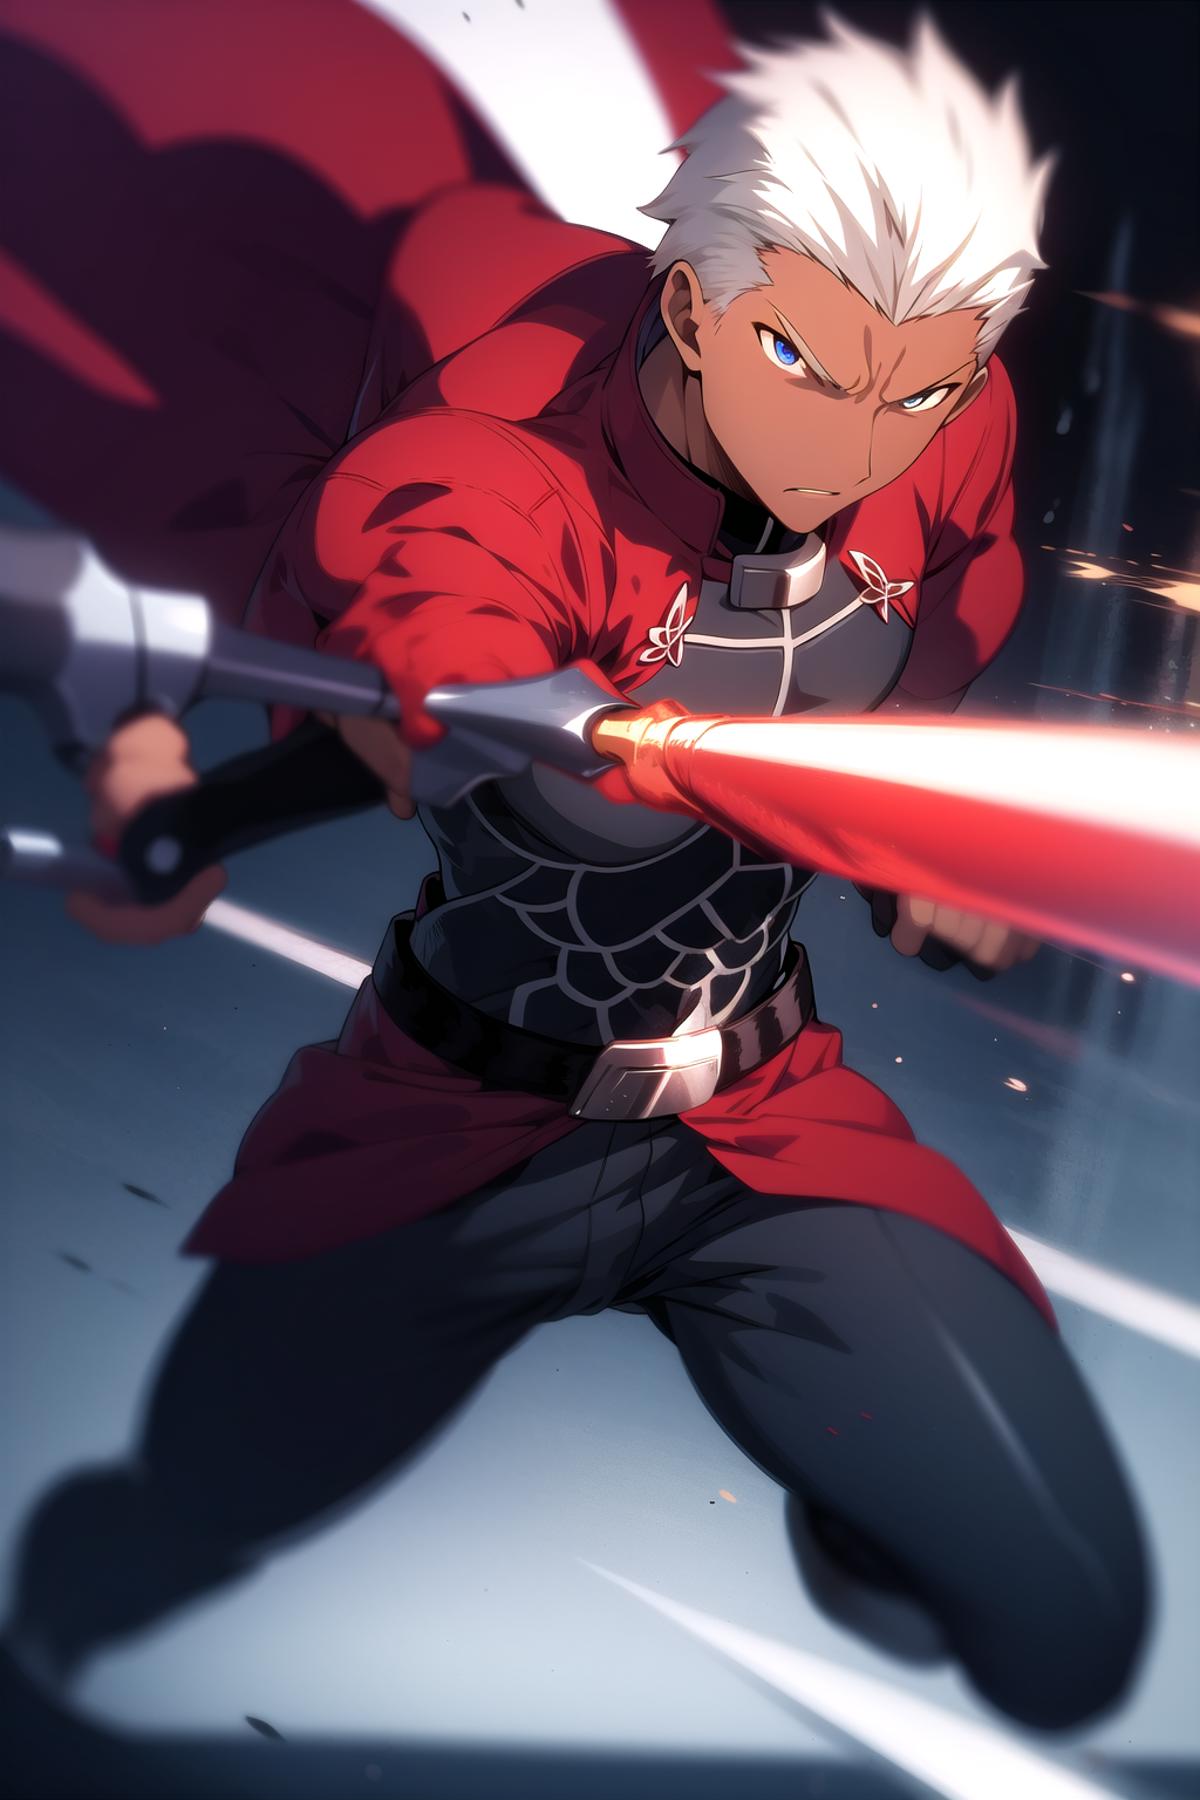 archer (fate/stay night) image by wrench1815